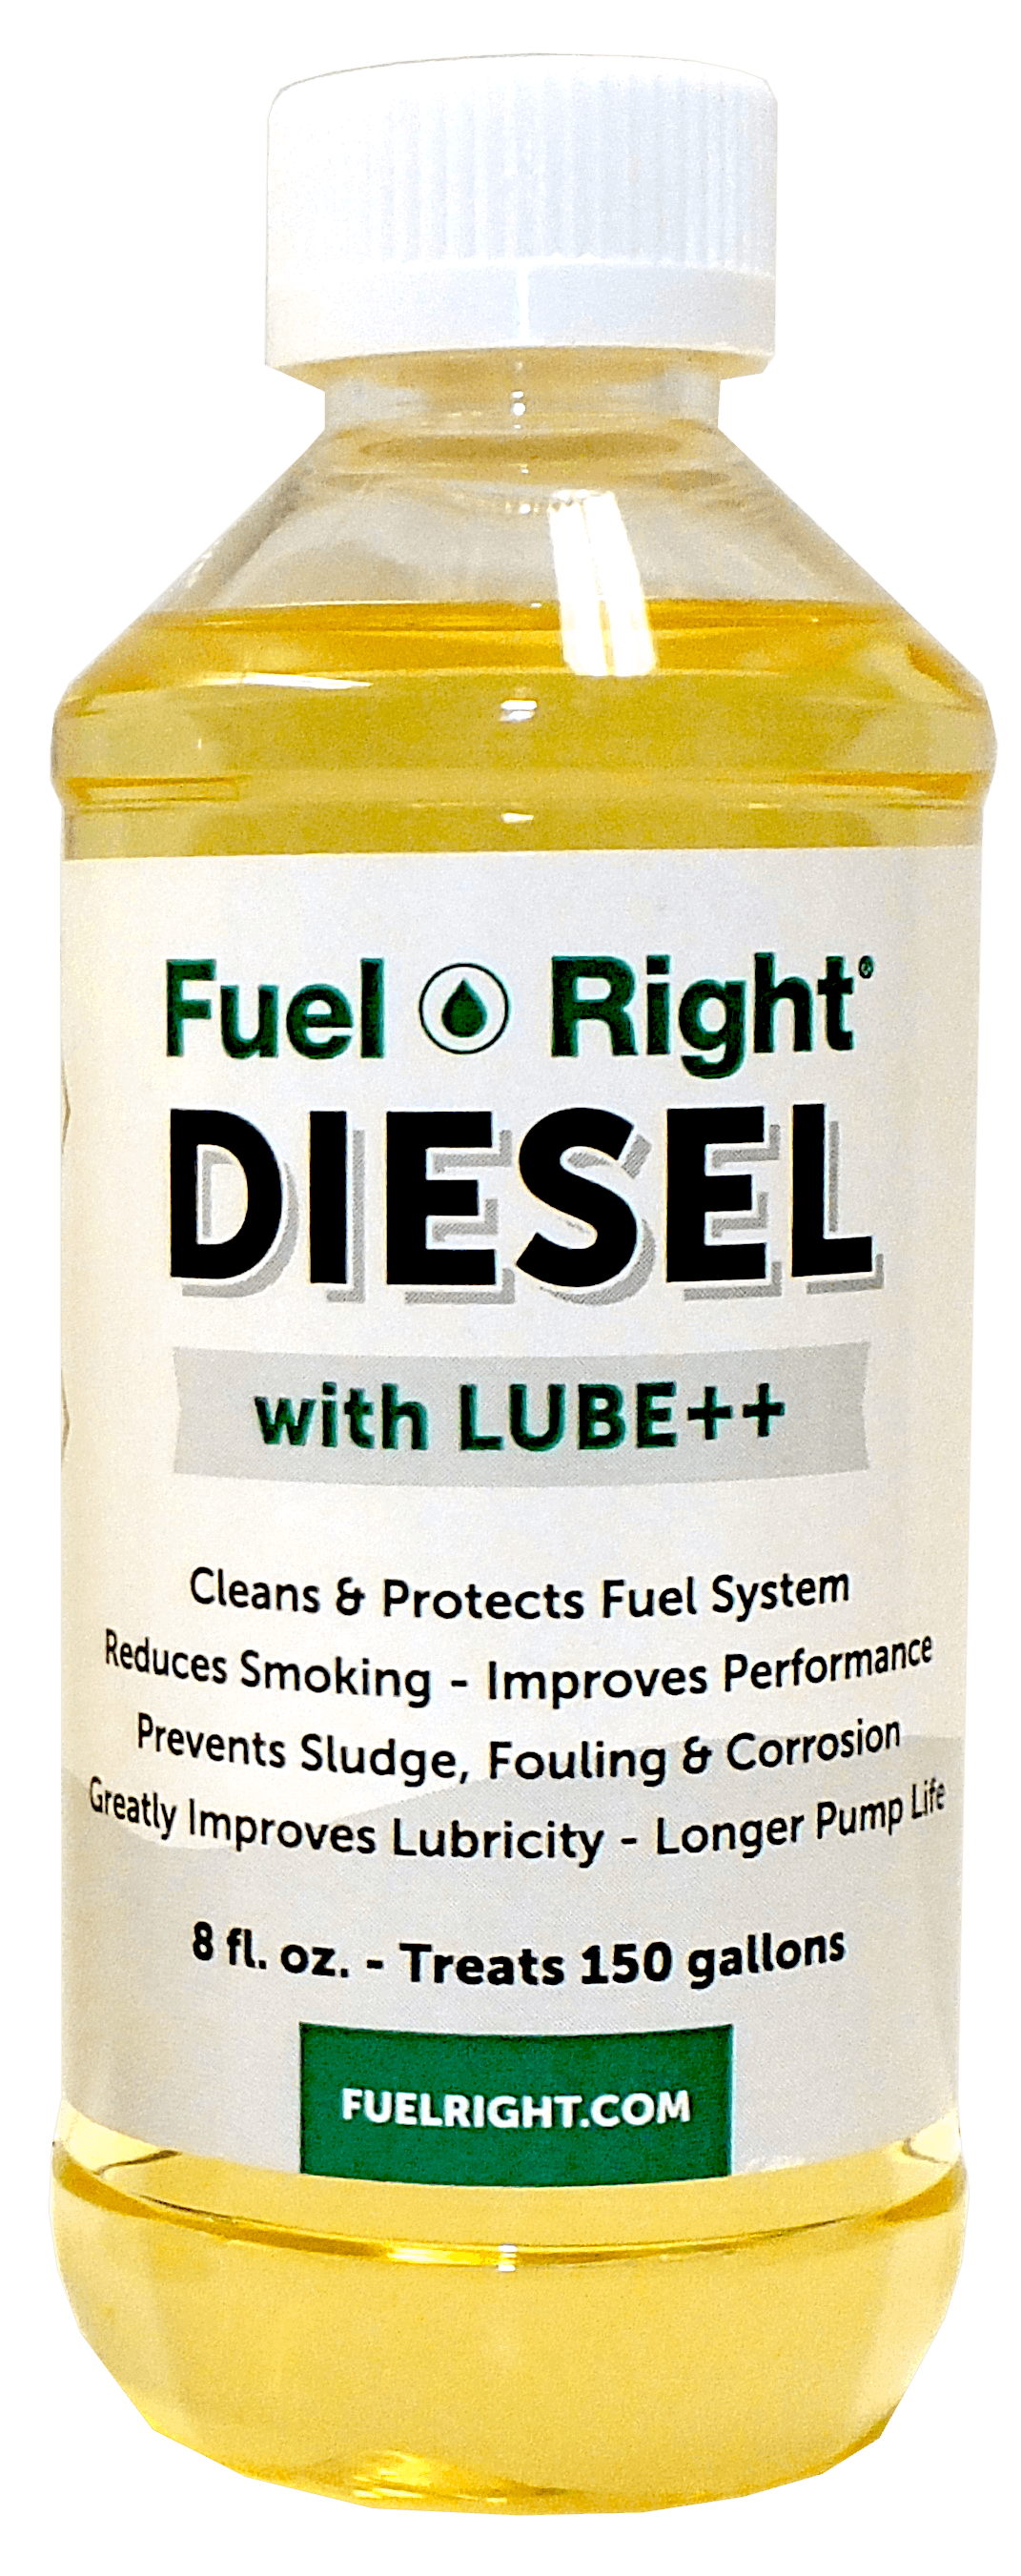 Fuel Right Diesel with Lube